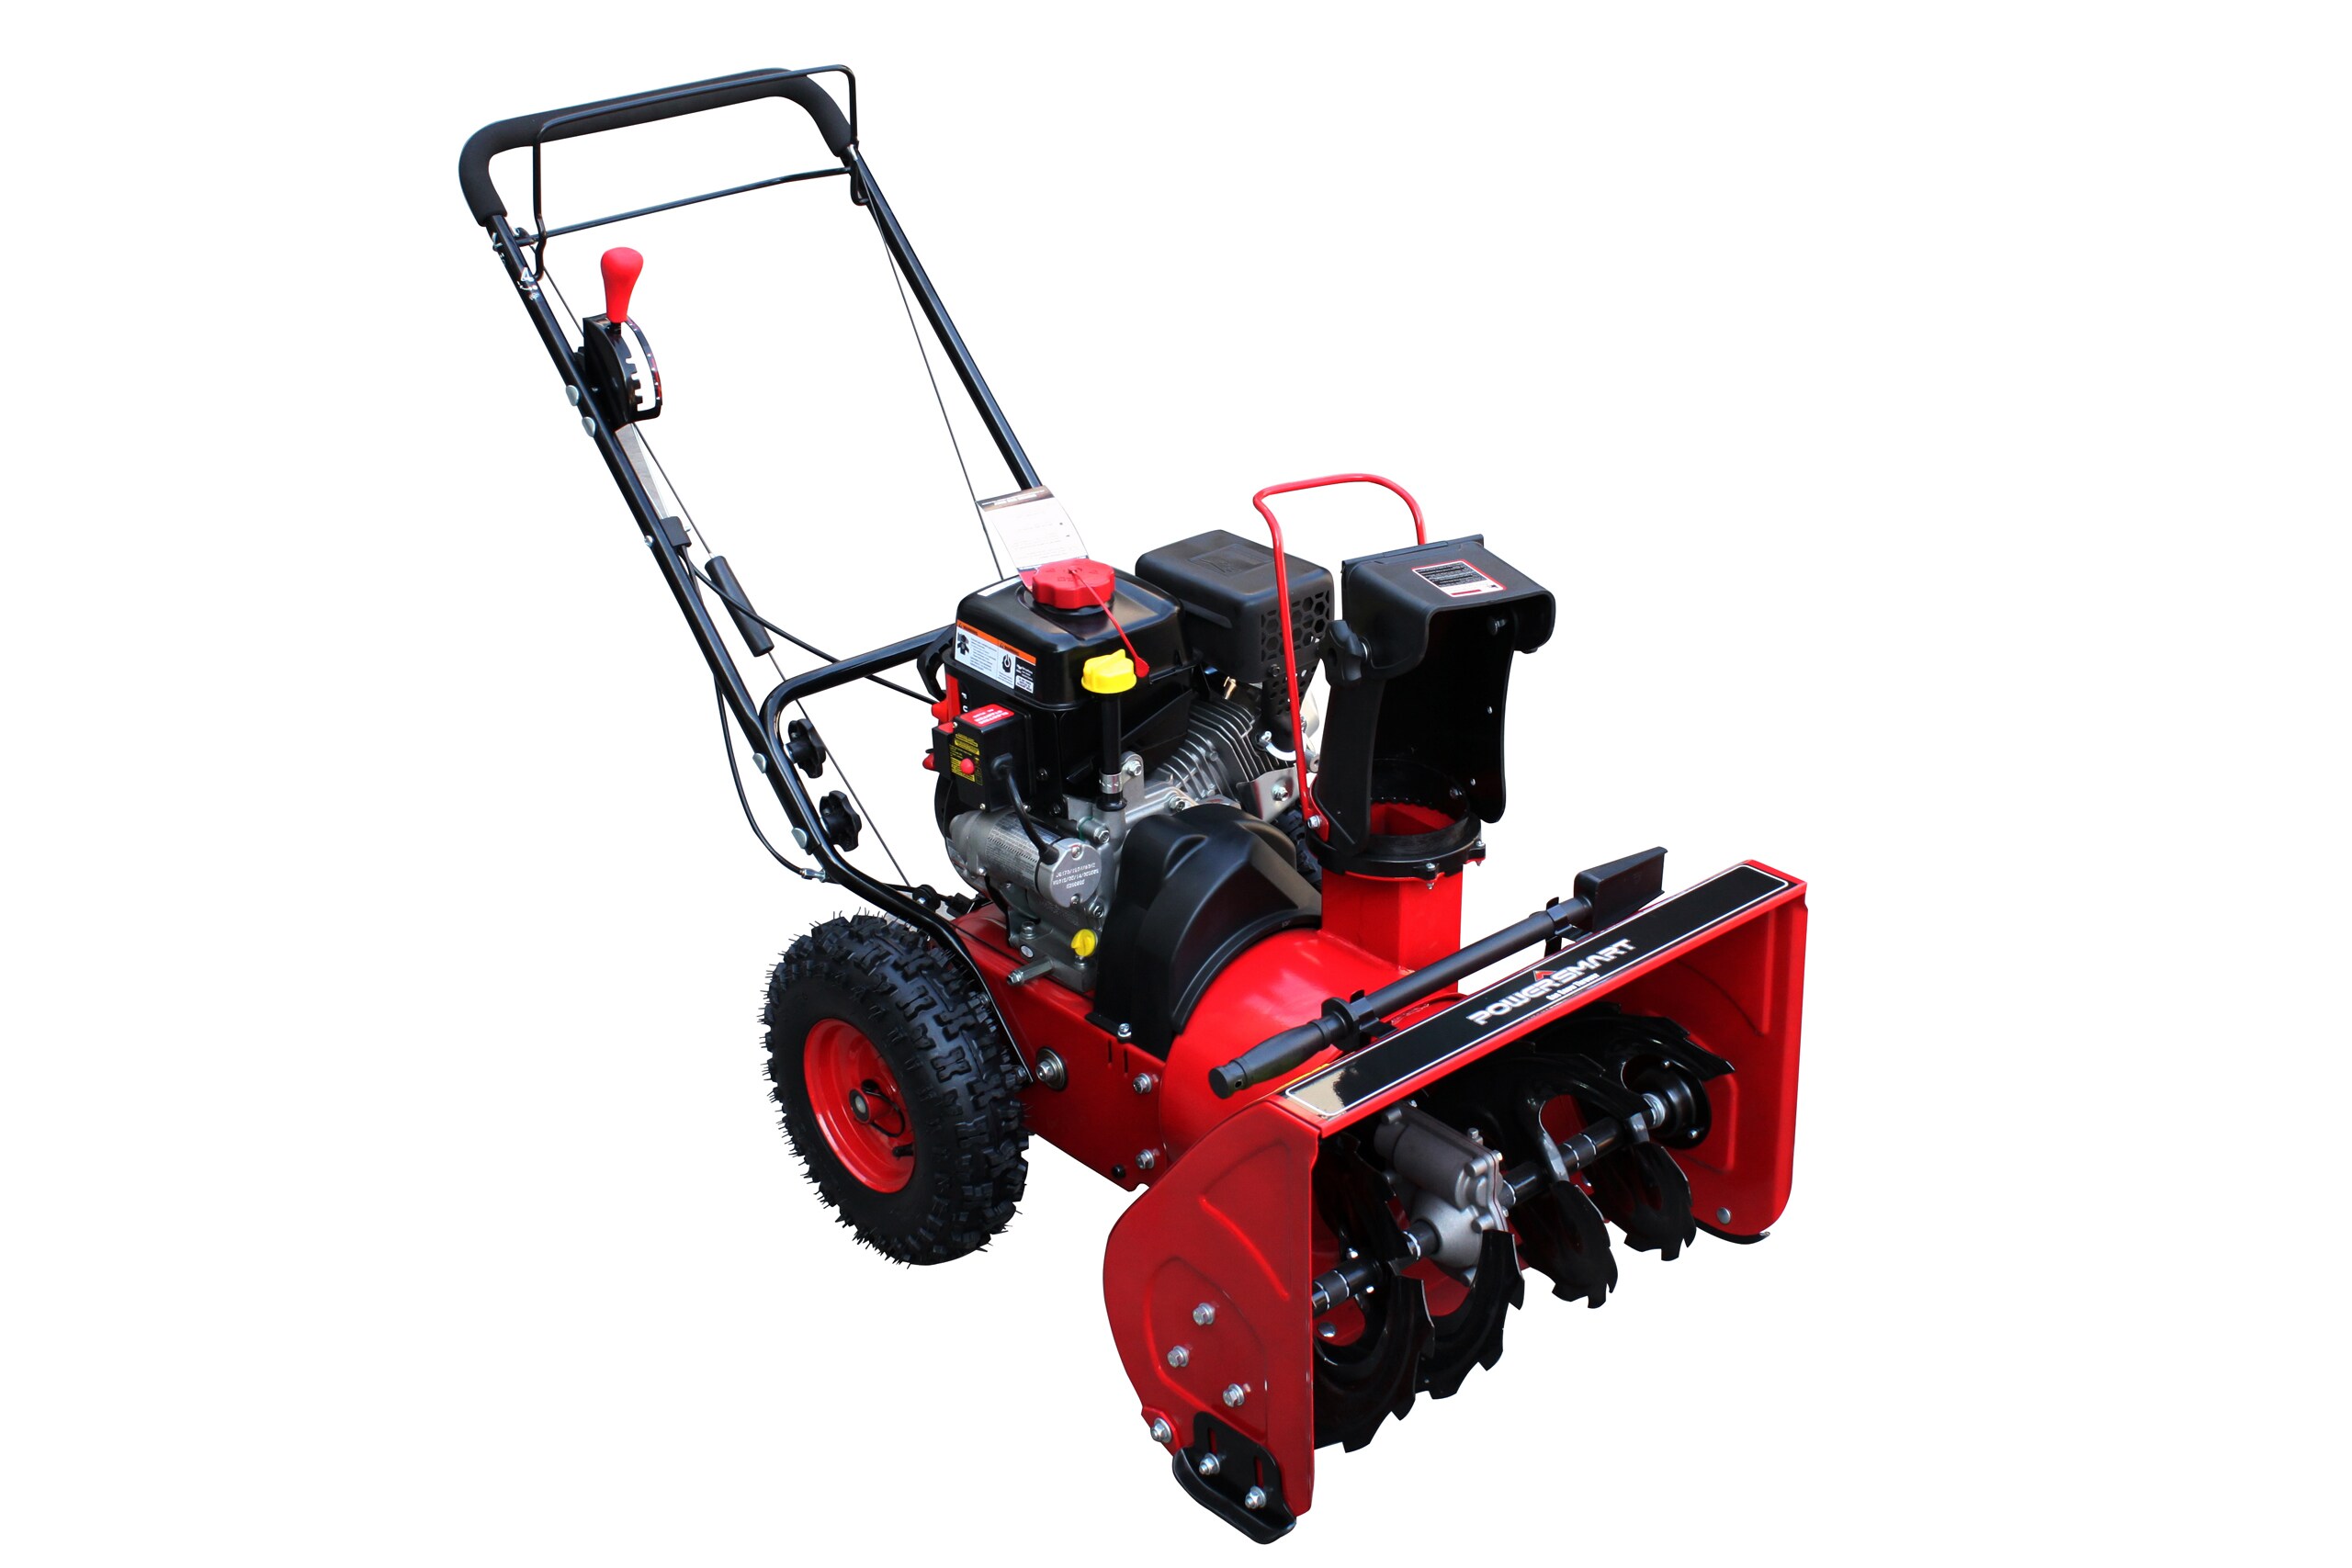 Power Smart 22-in Two-stage Self-propelled Gas Snow Blower at